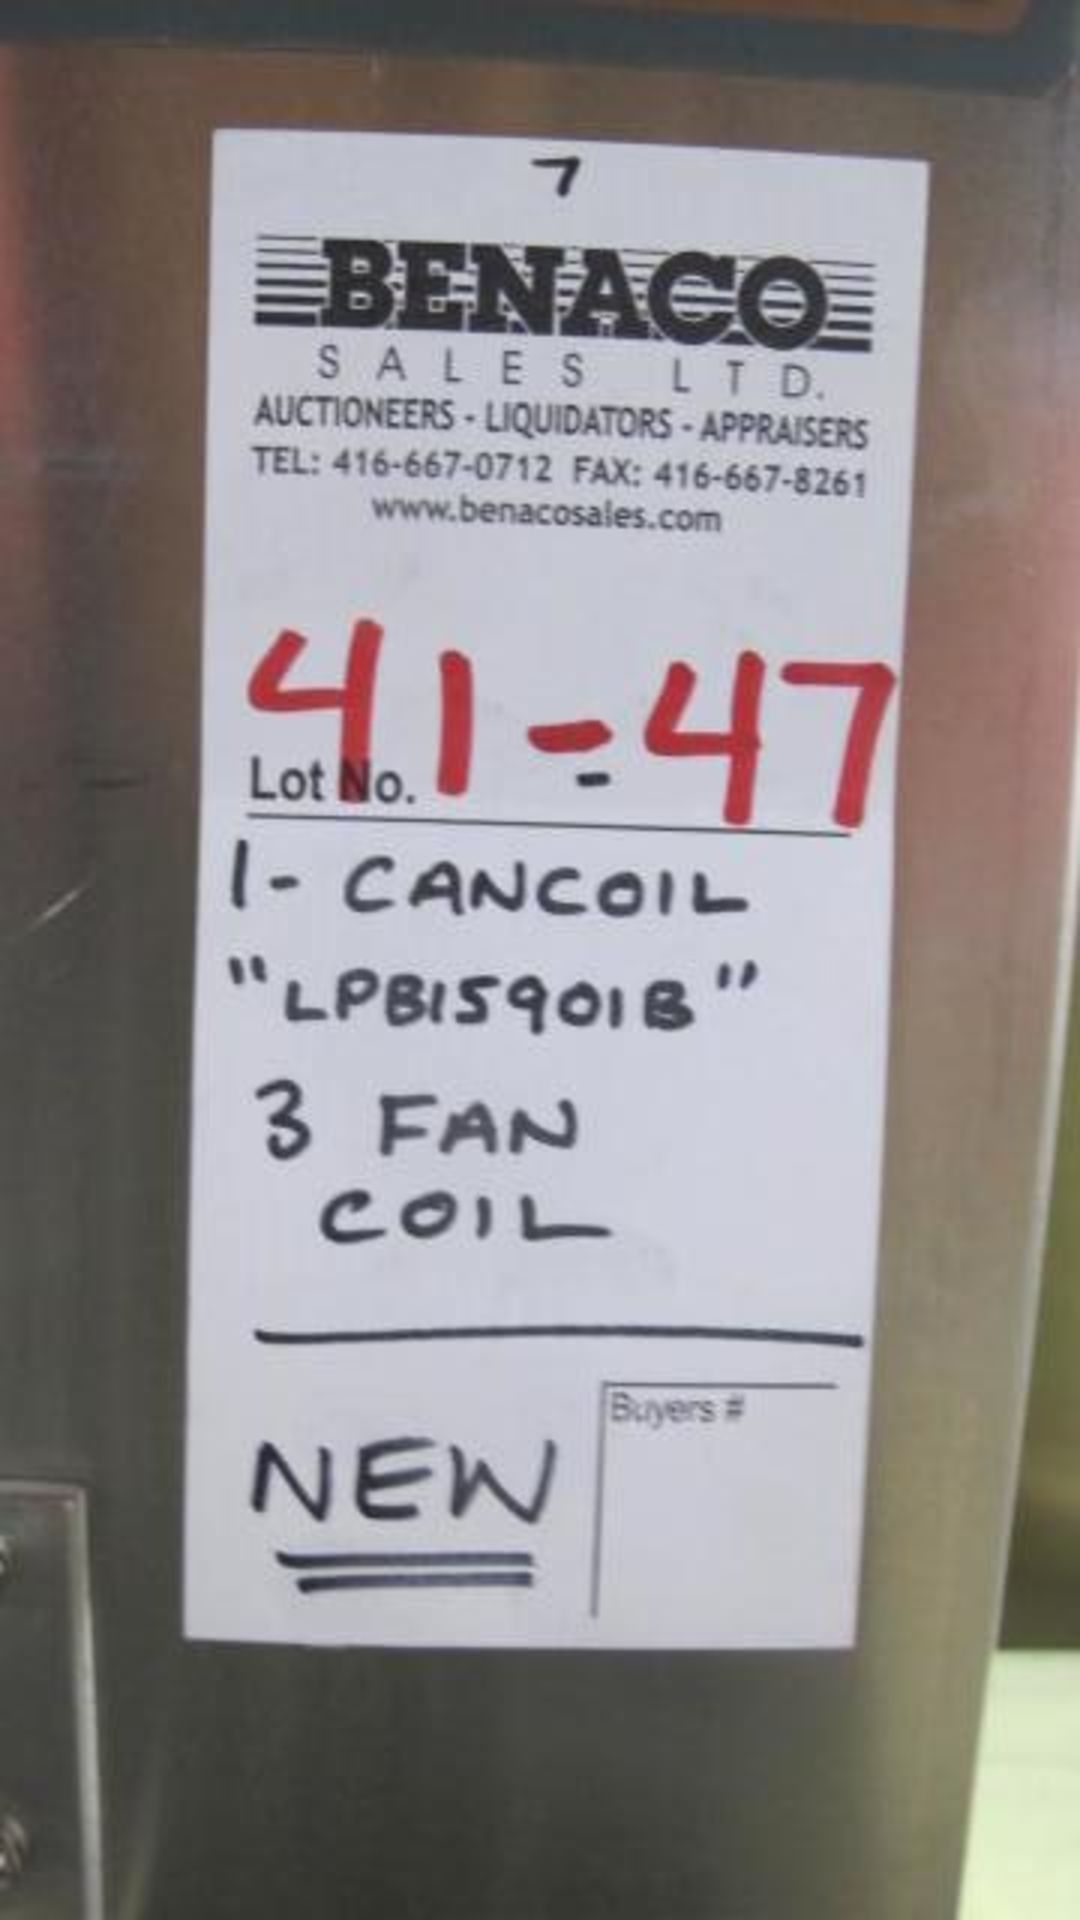 1X, NEW CANCOIL LPB15901B, 3 FAN COIL - Image 5 of 6